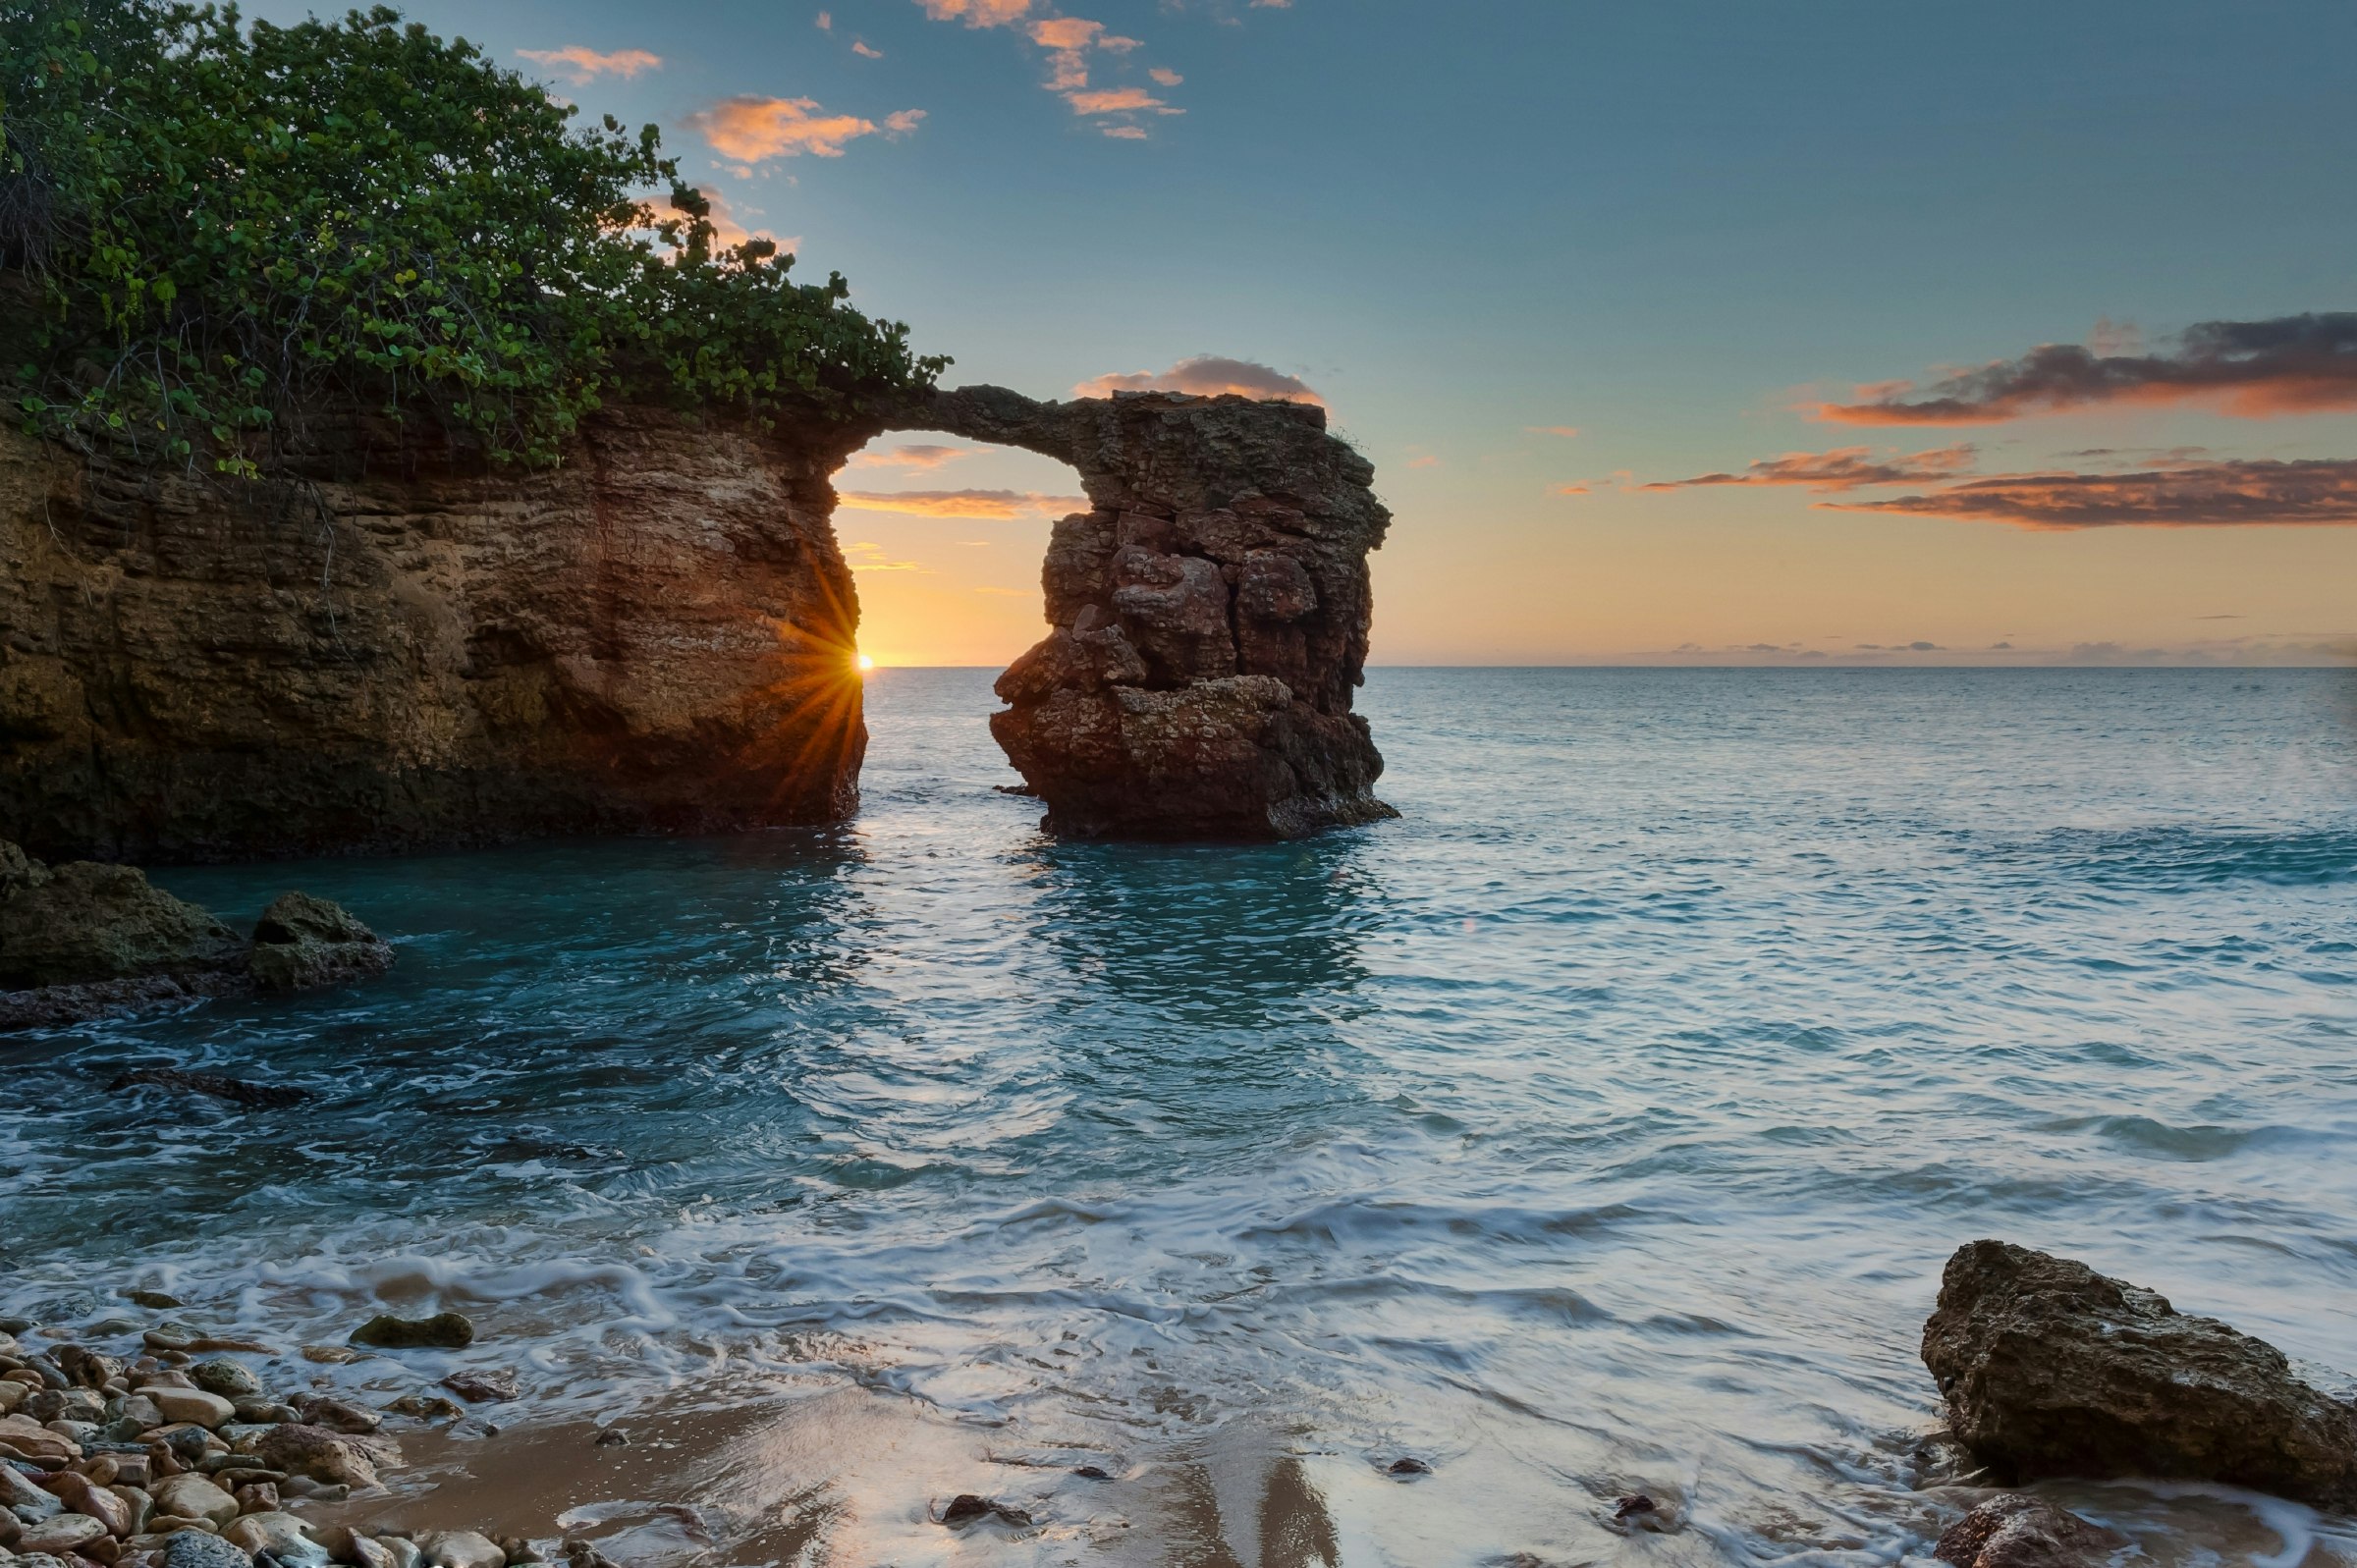 Sunset at the natural bridge formed by rock formation near the Cabo Rojo Lighthouse in Puerto Rico 